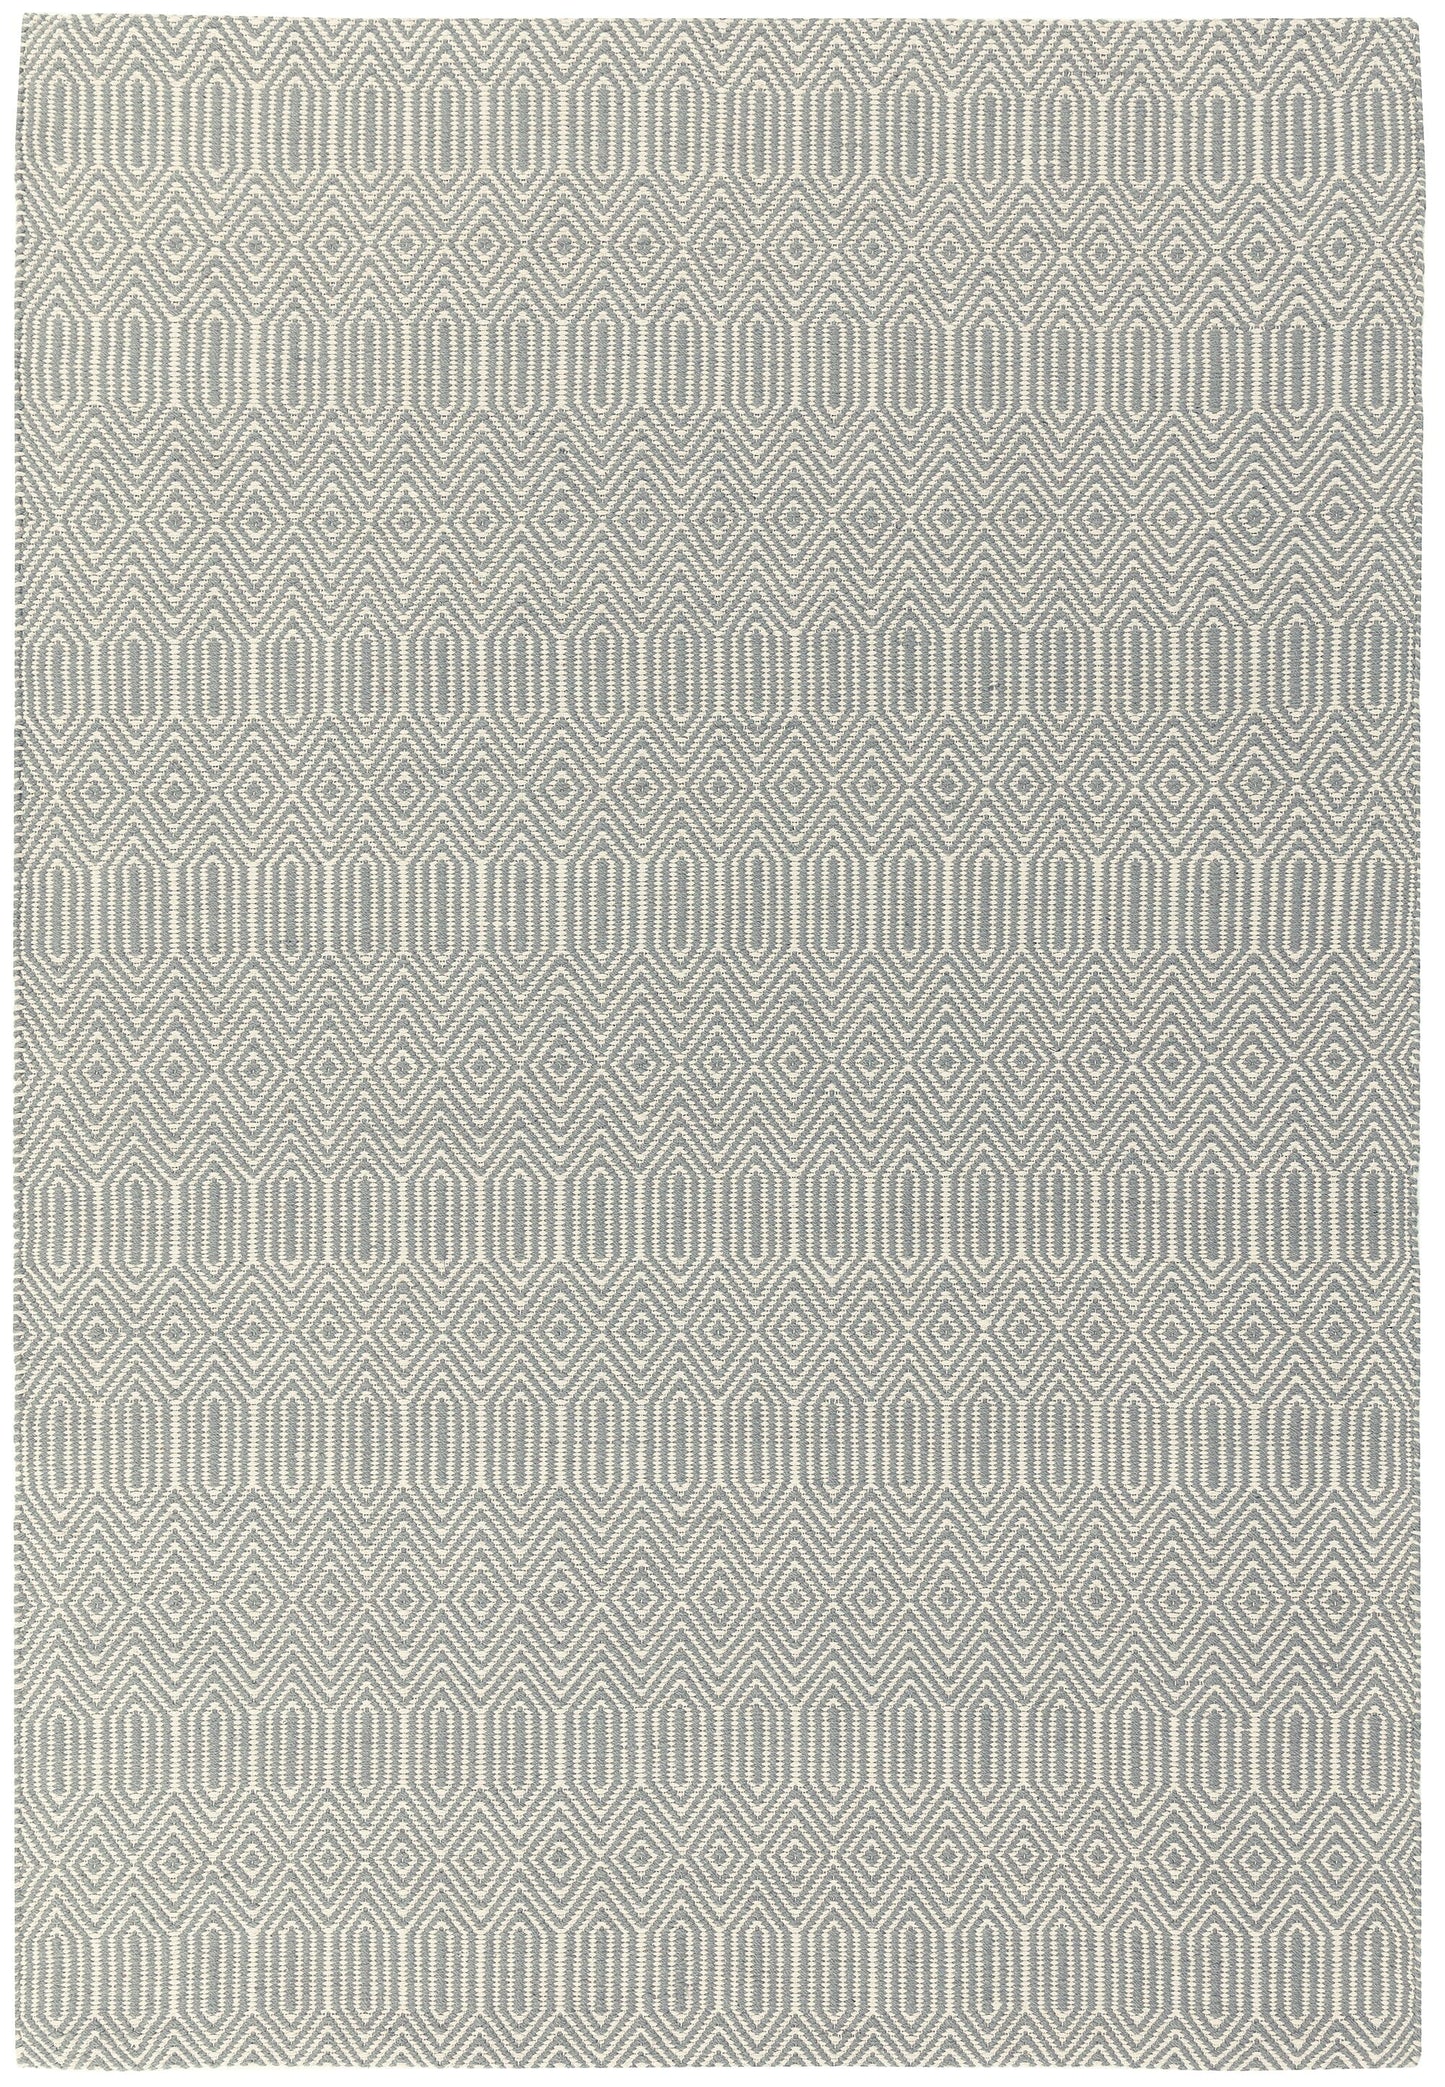 Asiatic Carpets Sloan Hand Woven Rug Silver - 100 x 150cm